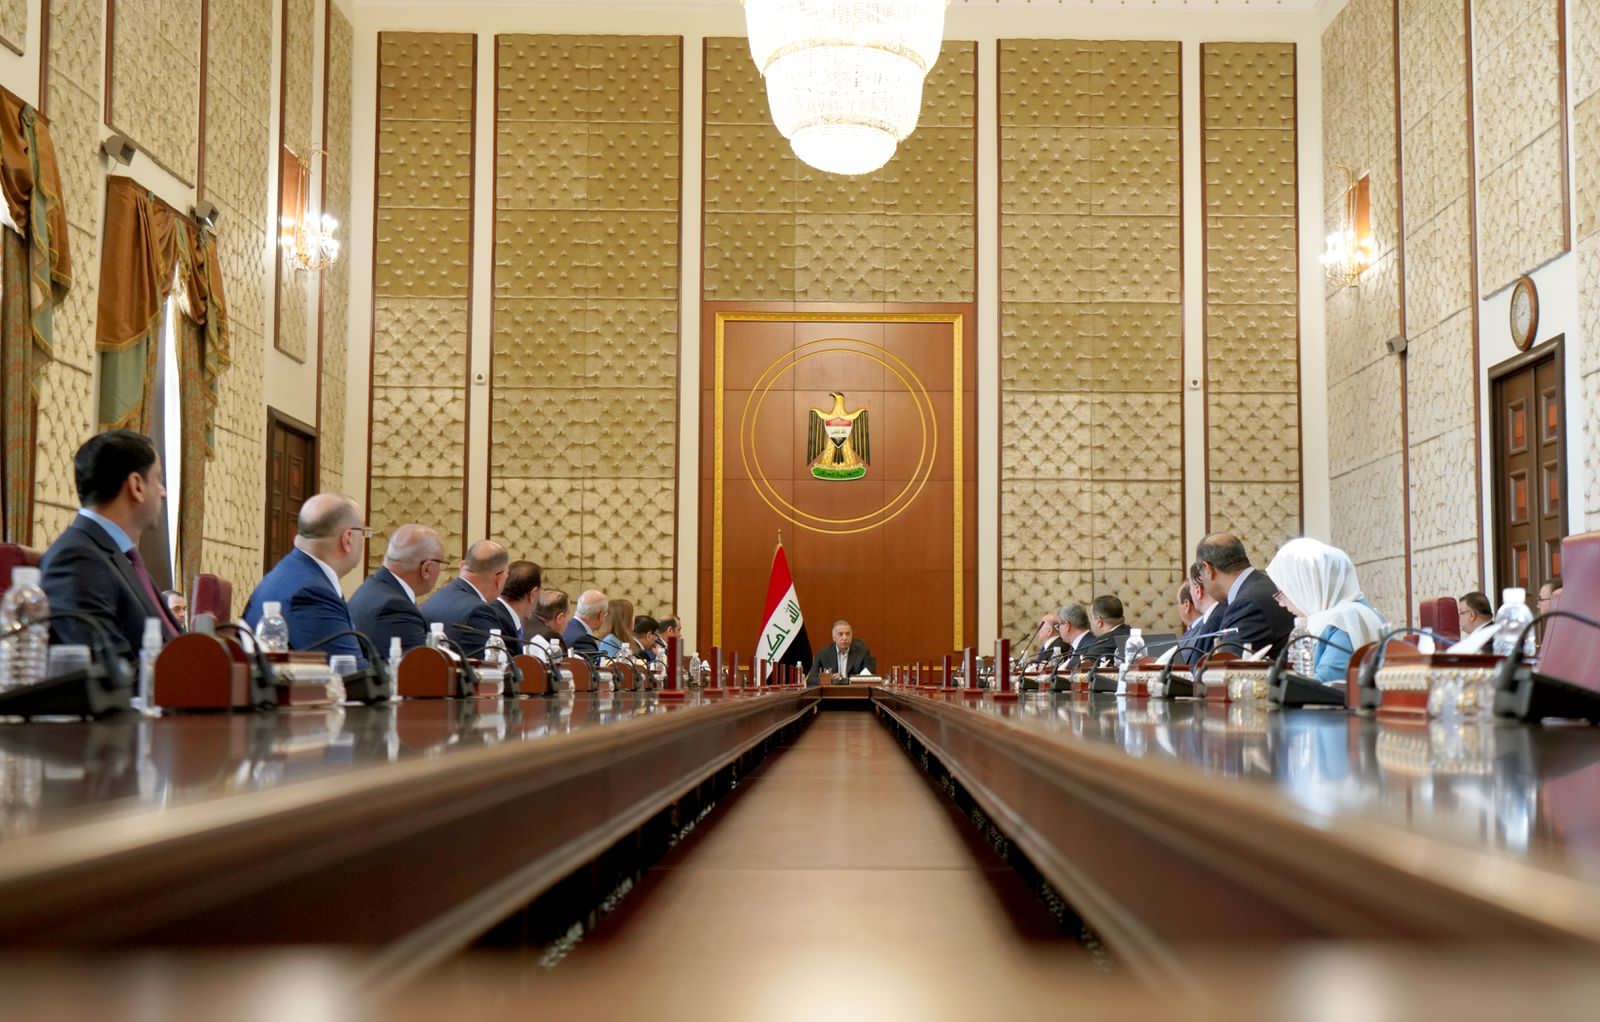 The Council of Ministers issues 5 new economic investment and financial decisions